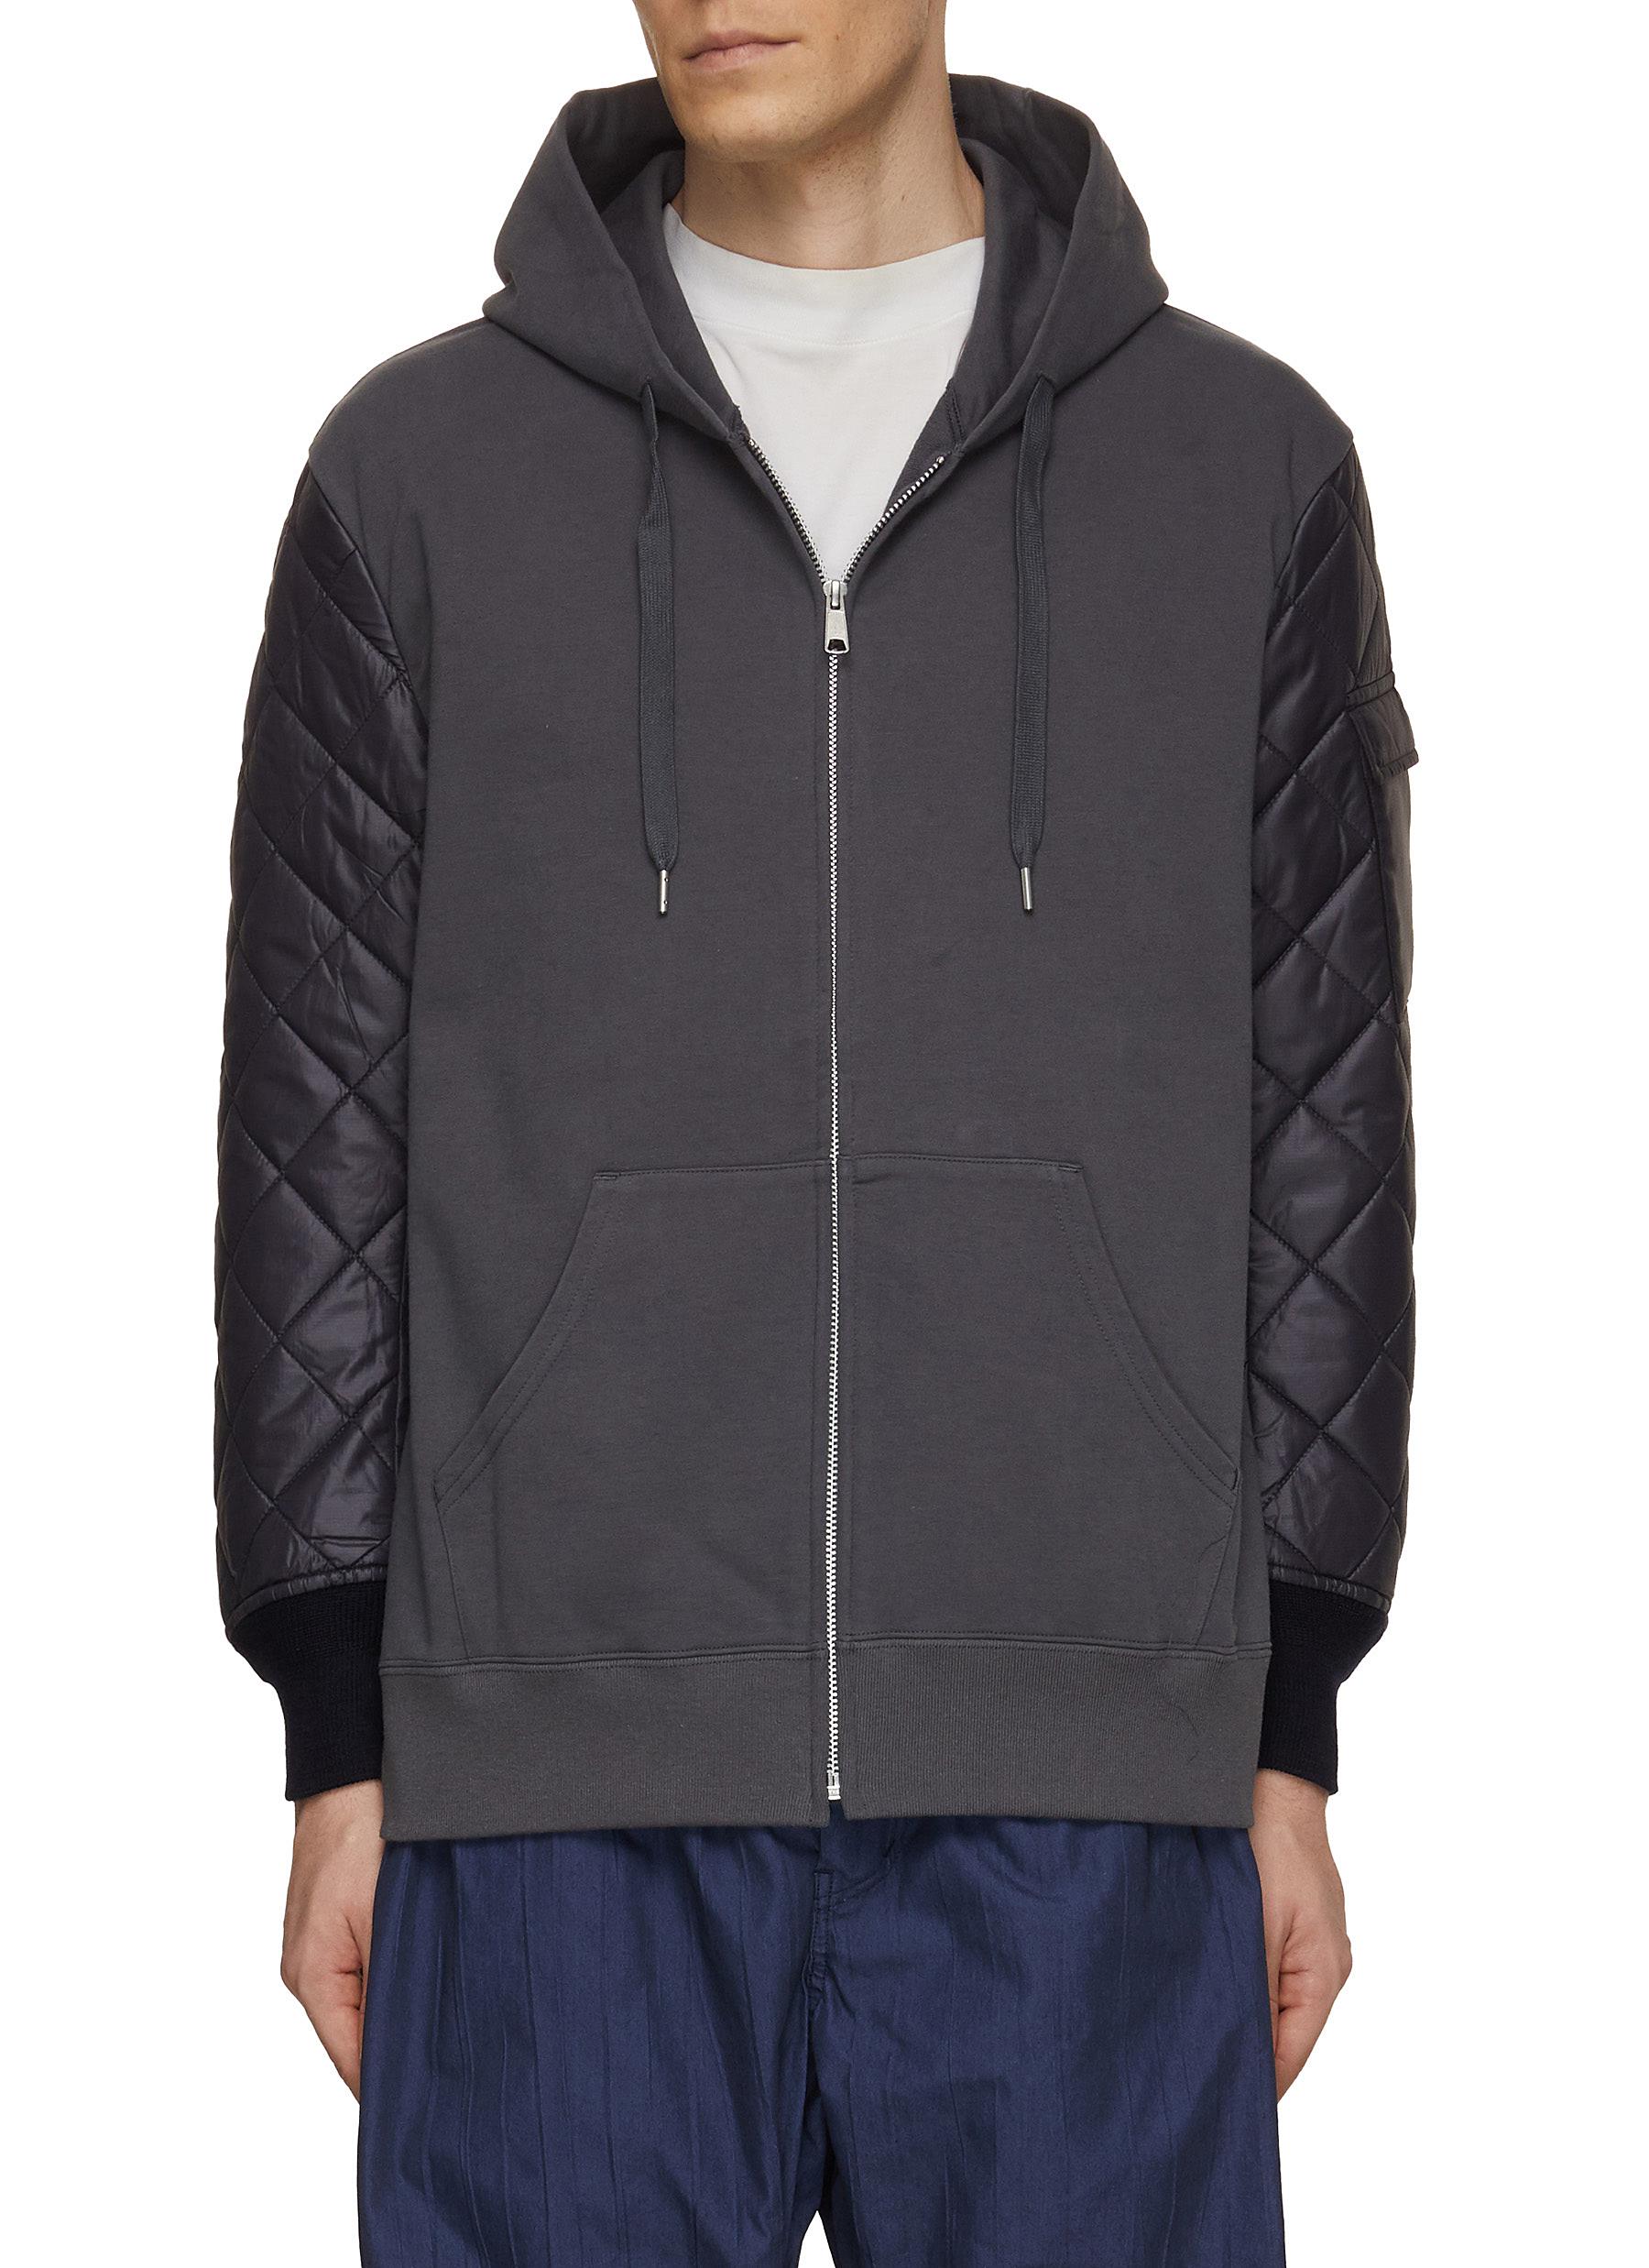 Louis Vuitton Monogram Quilted Hooded Jacket